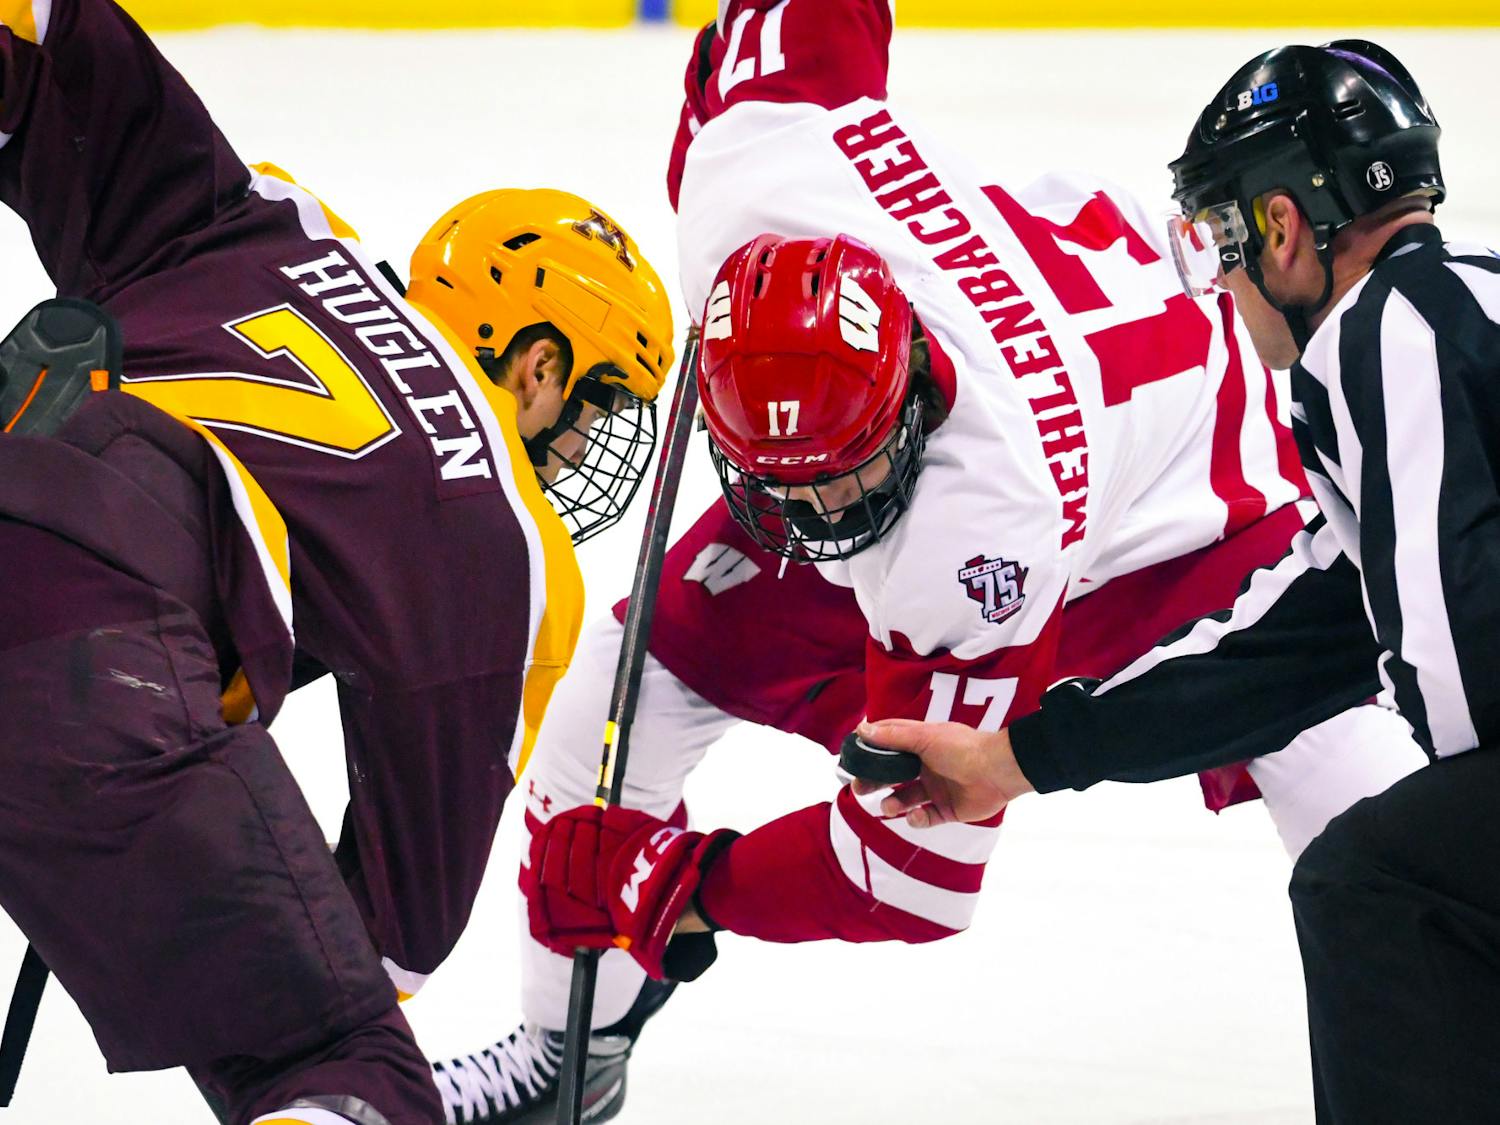 PHOTOS: Minnesota pushes past No. 9 Wisconsin in overtime brawl, 2-1